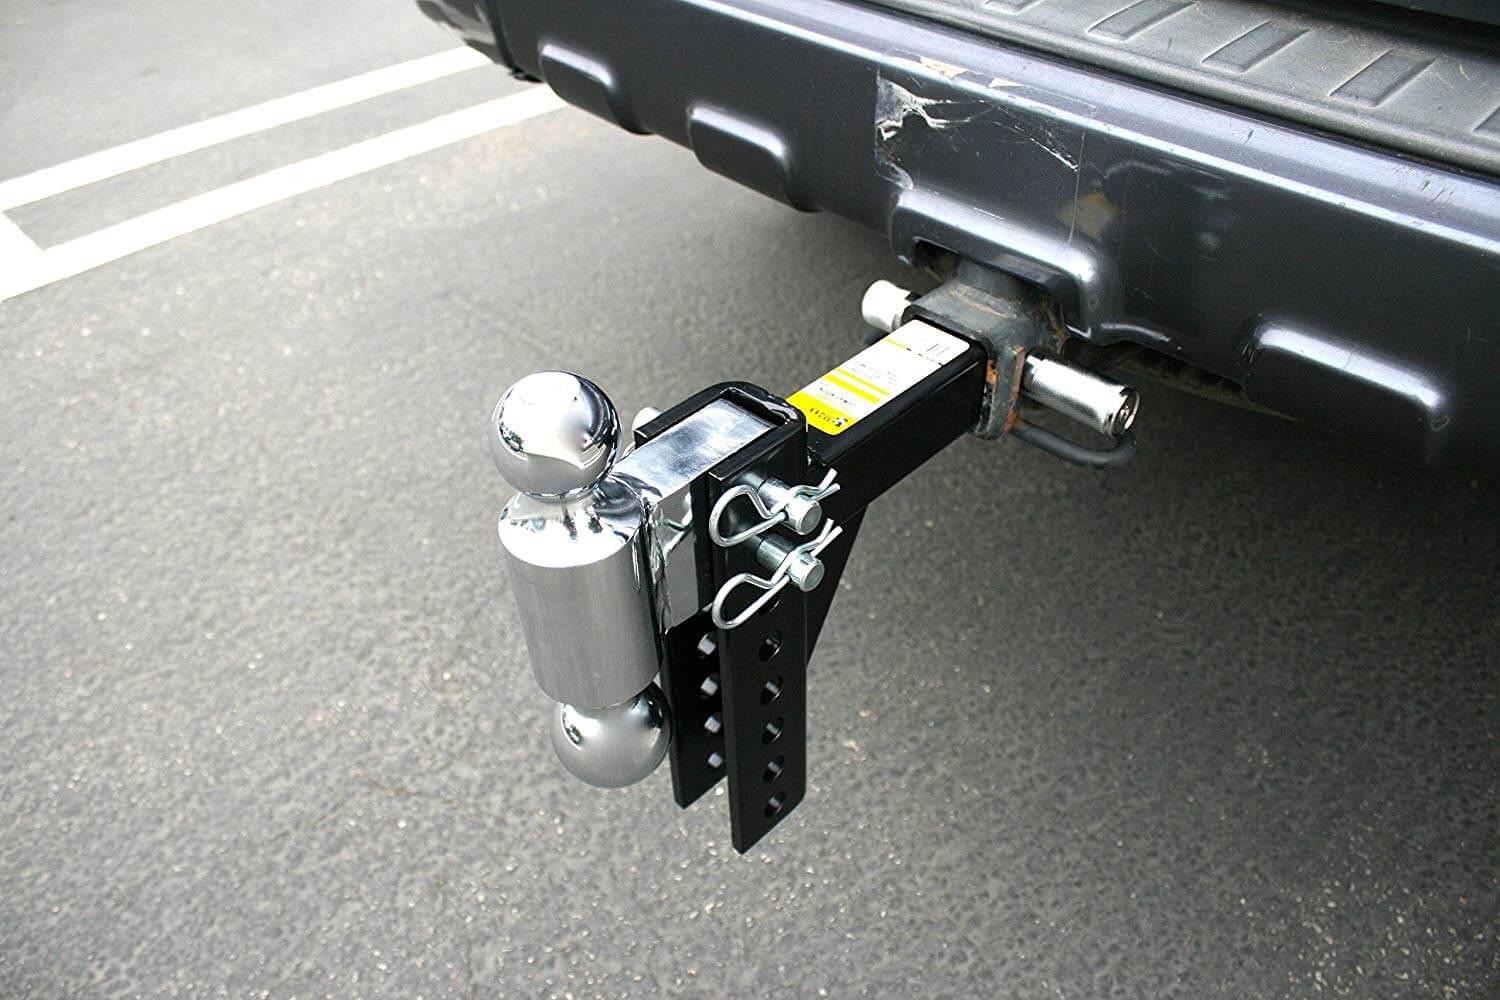 Best Tow Hitches for Caravan 2020